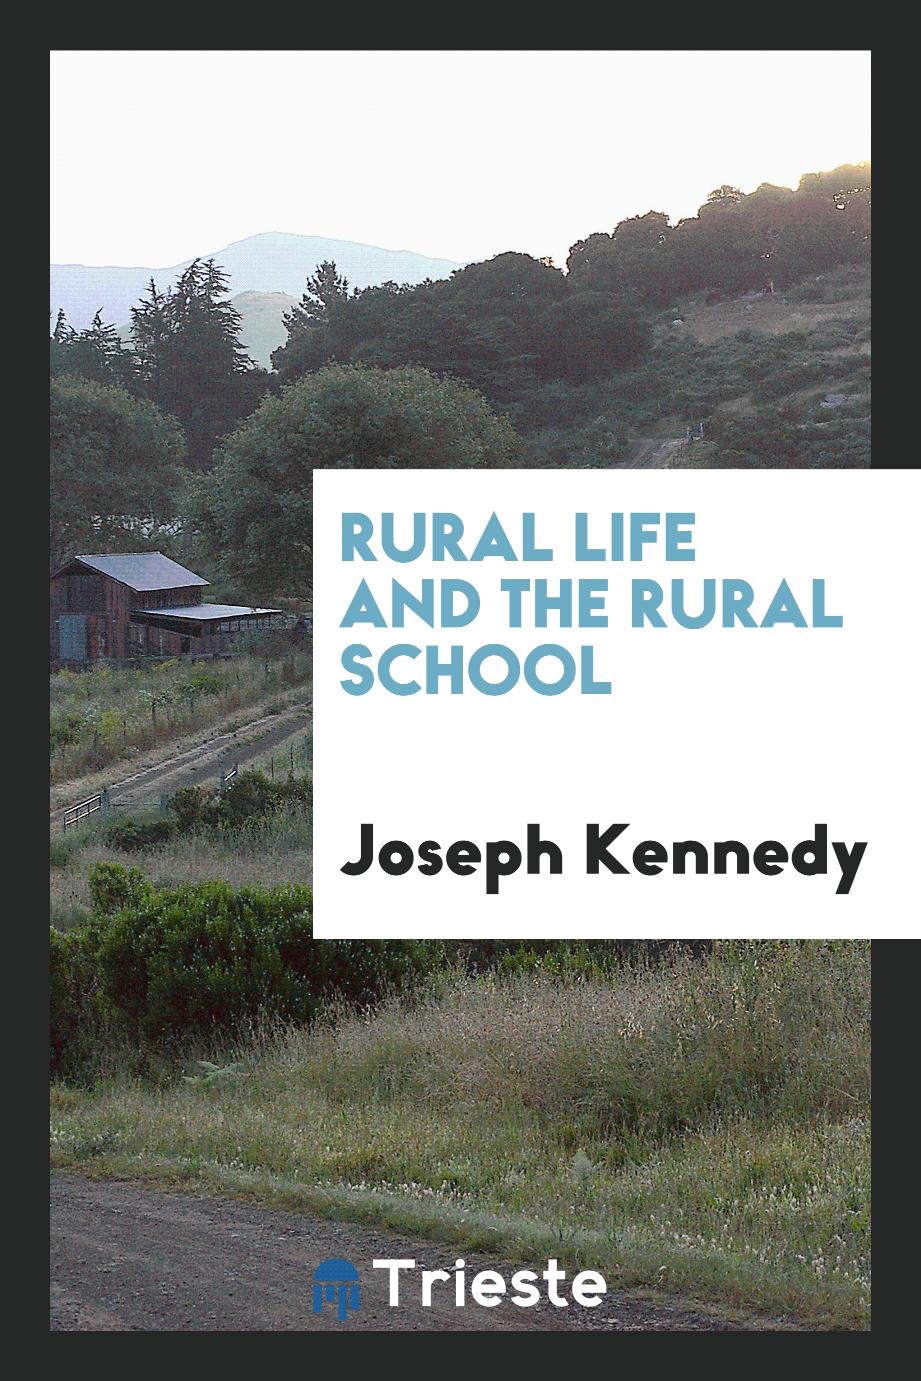 Rural life and the rural school